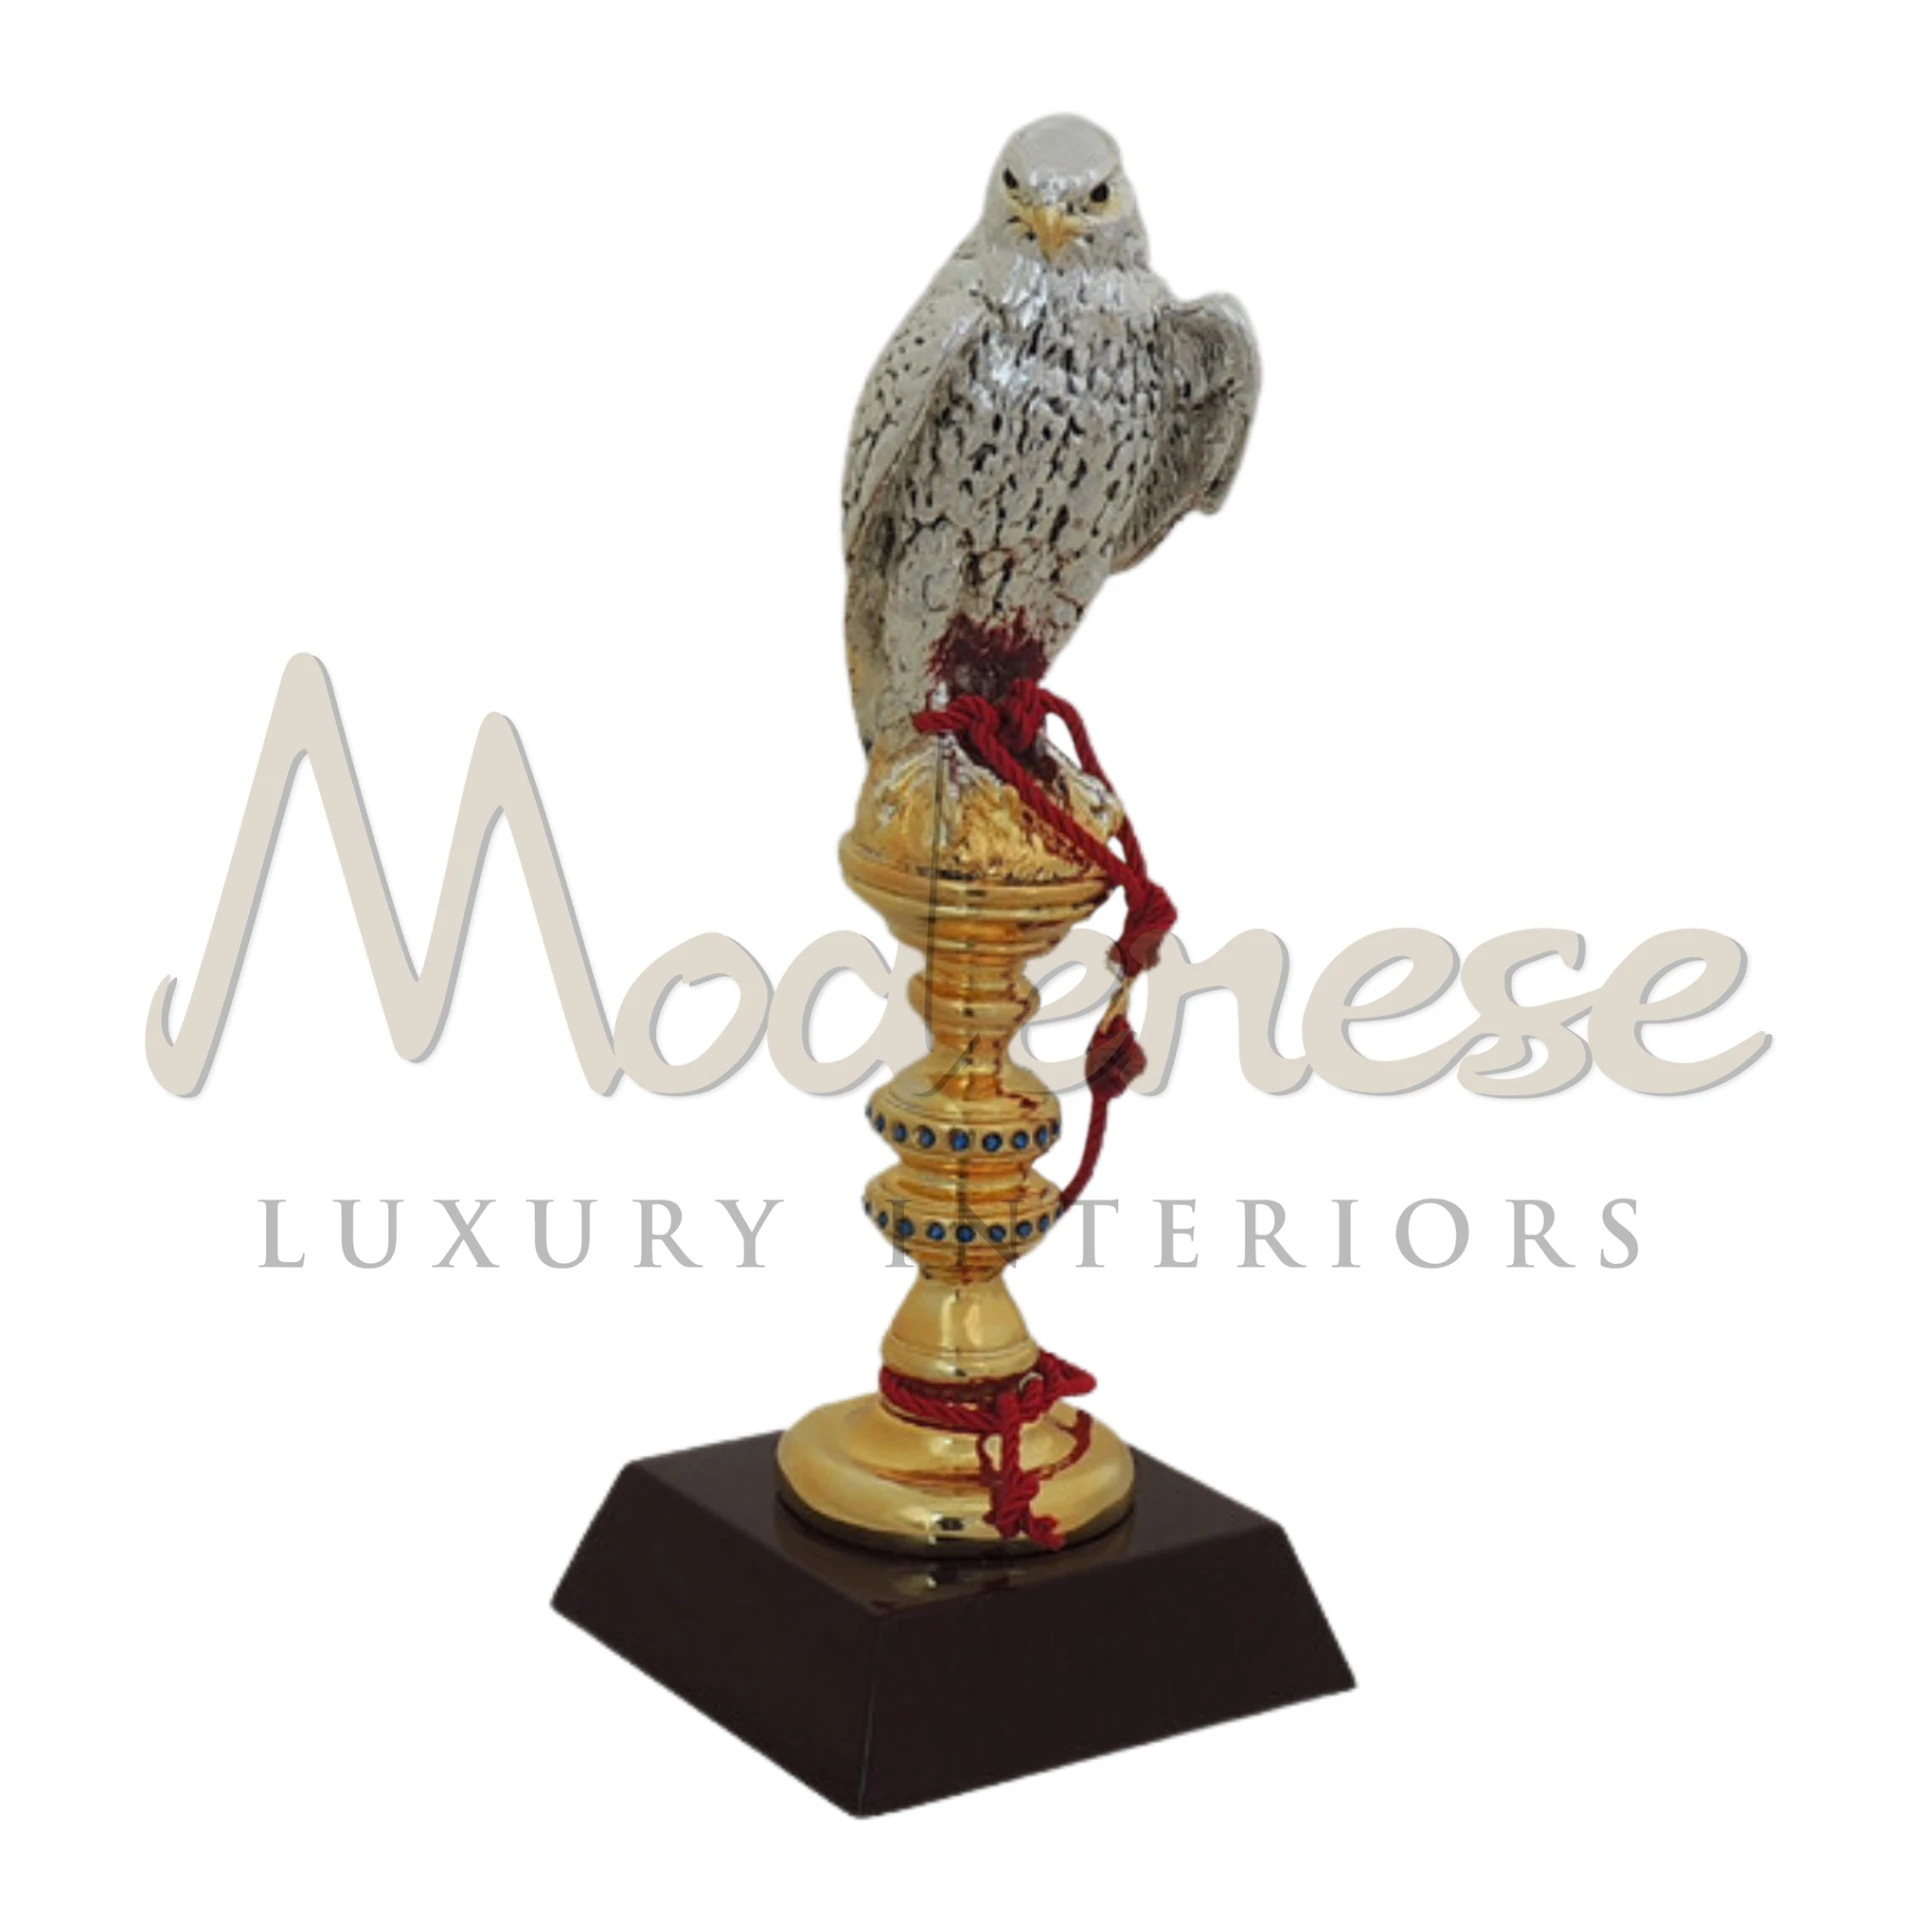 Luxury Silver Falcon statuette in dynamic or regal pose, embodying elegance for sophisticated luxury home décor.